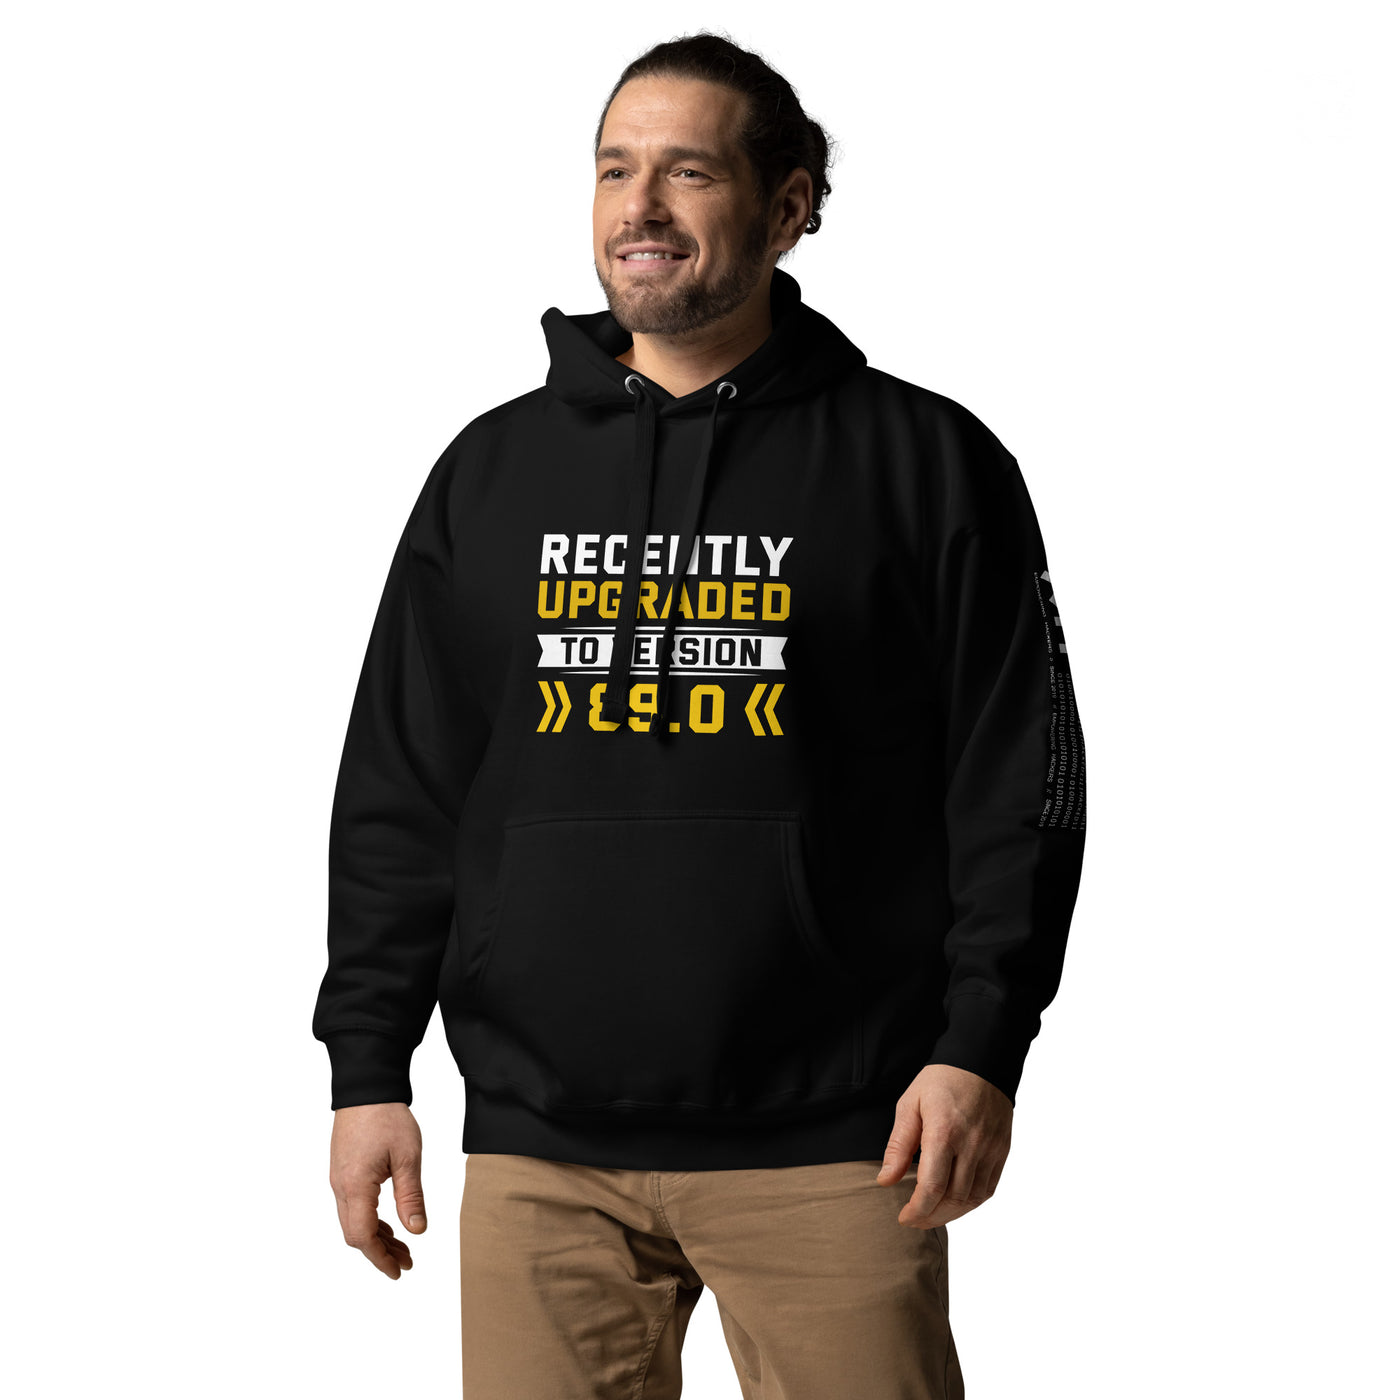 Recently Upgraded to Version >>89.0<< - Unisex Hoodie